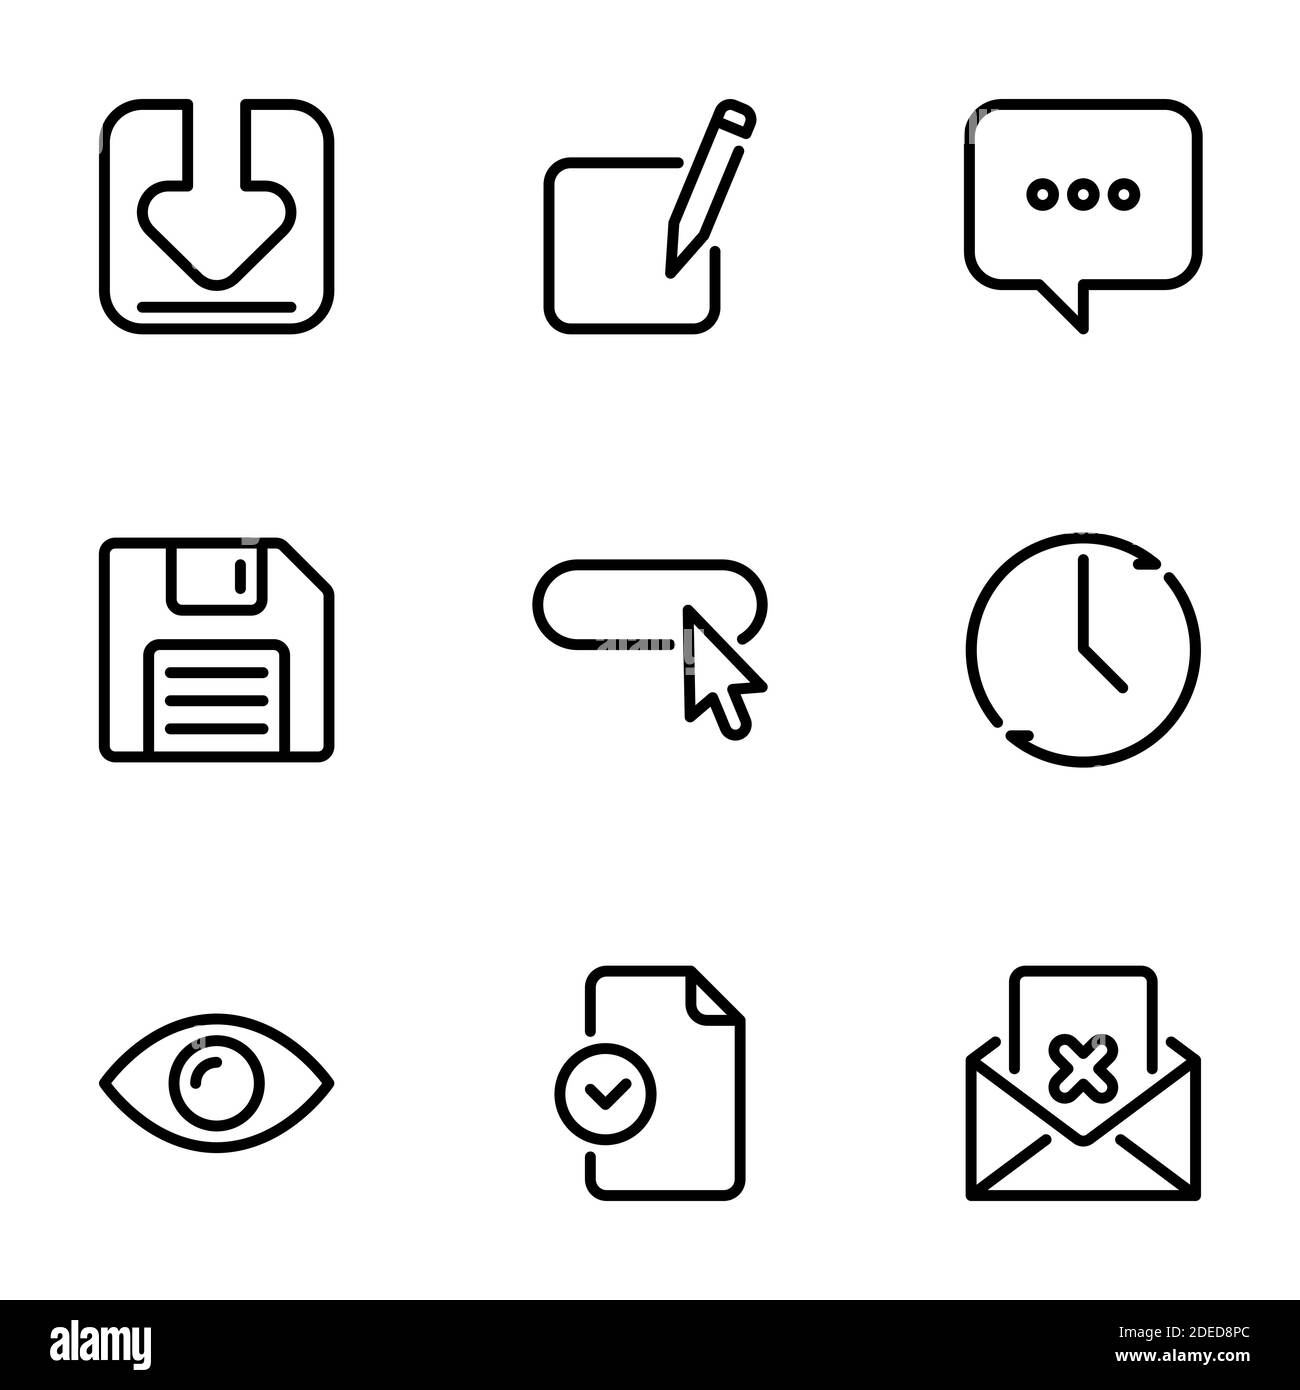 Set of black vector icons, isolated on white background, on theme Loading, editing documents and files for verification. Submit Stock Vector